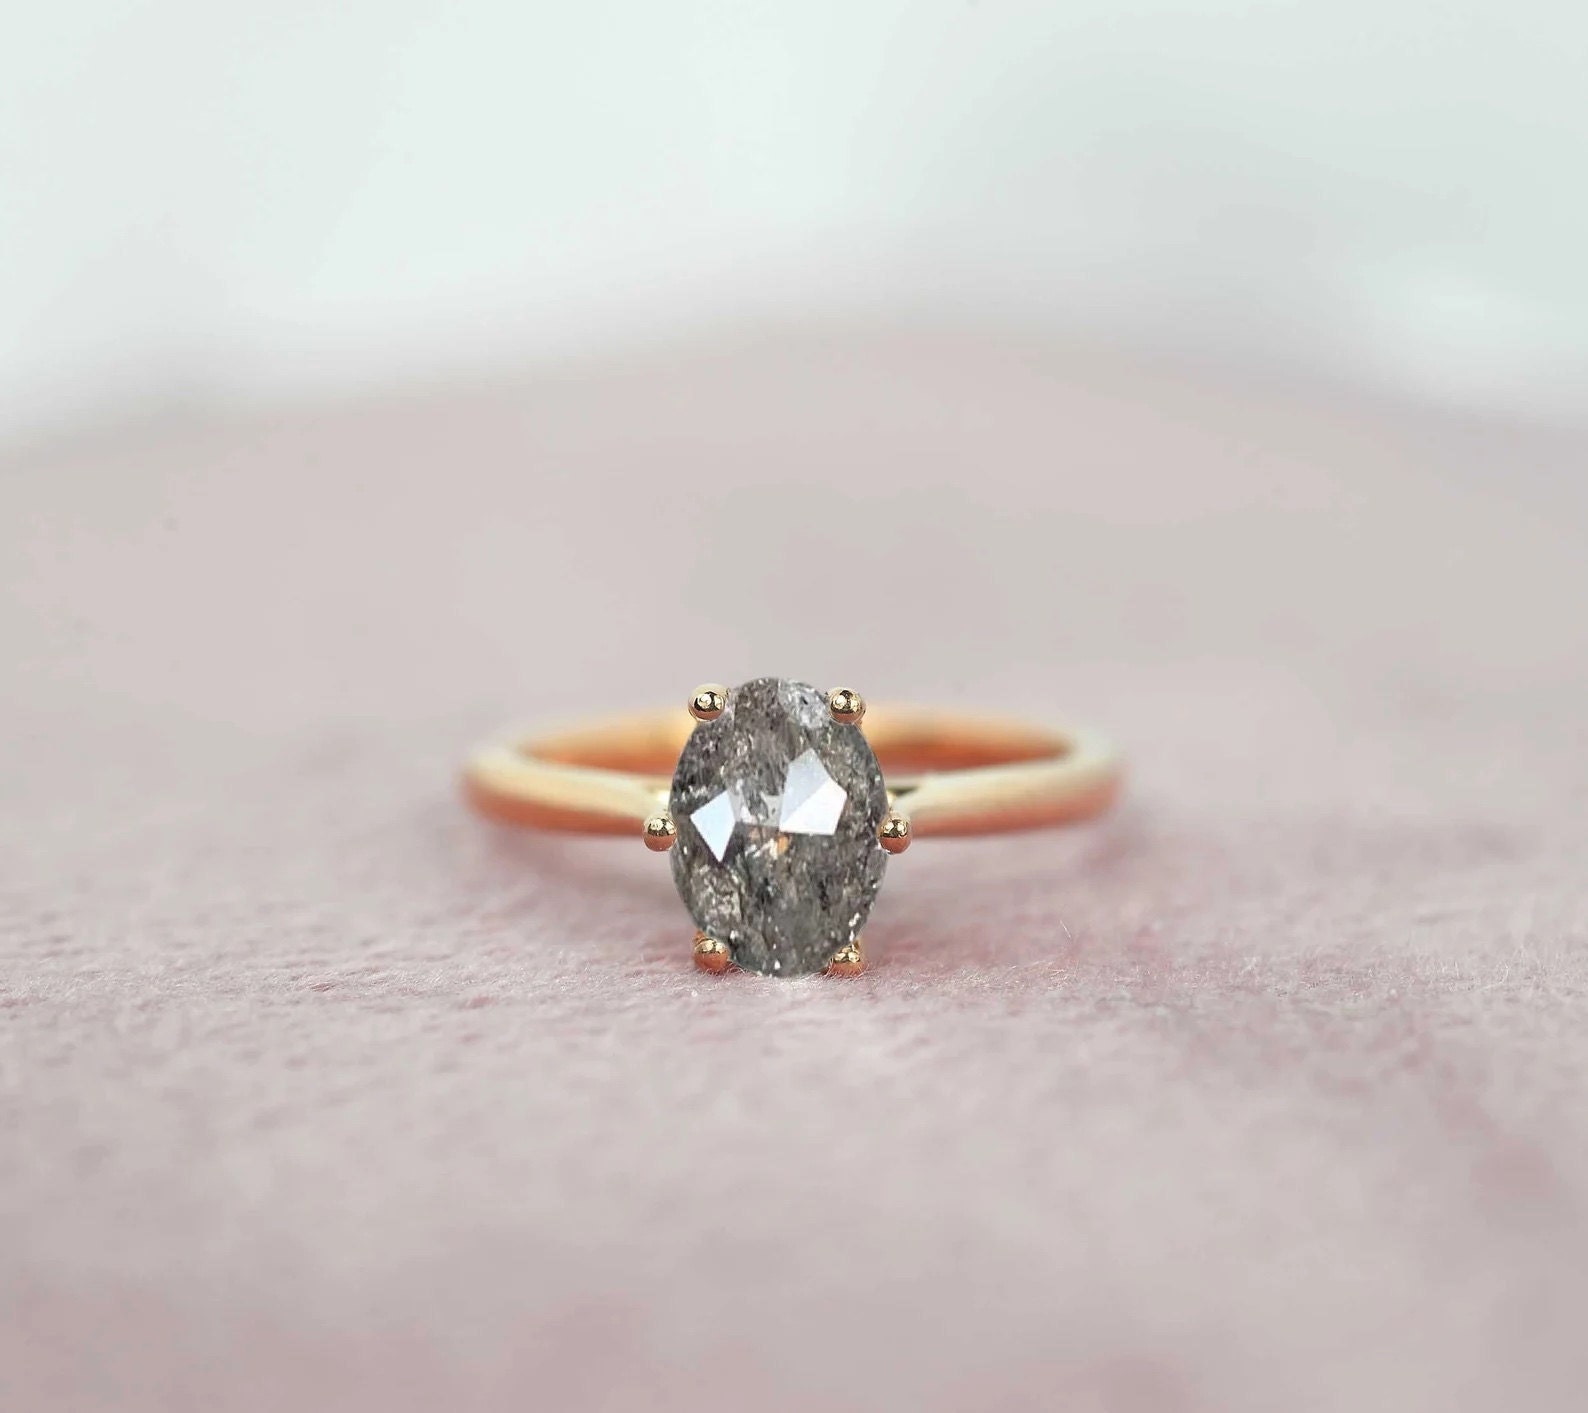 Oval engagement ring from Etsy